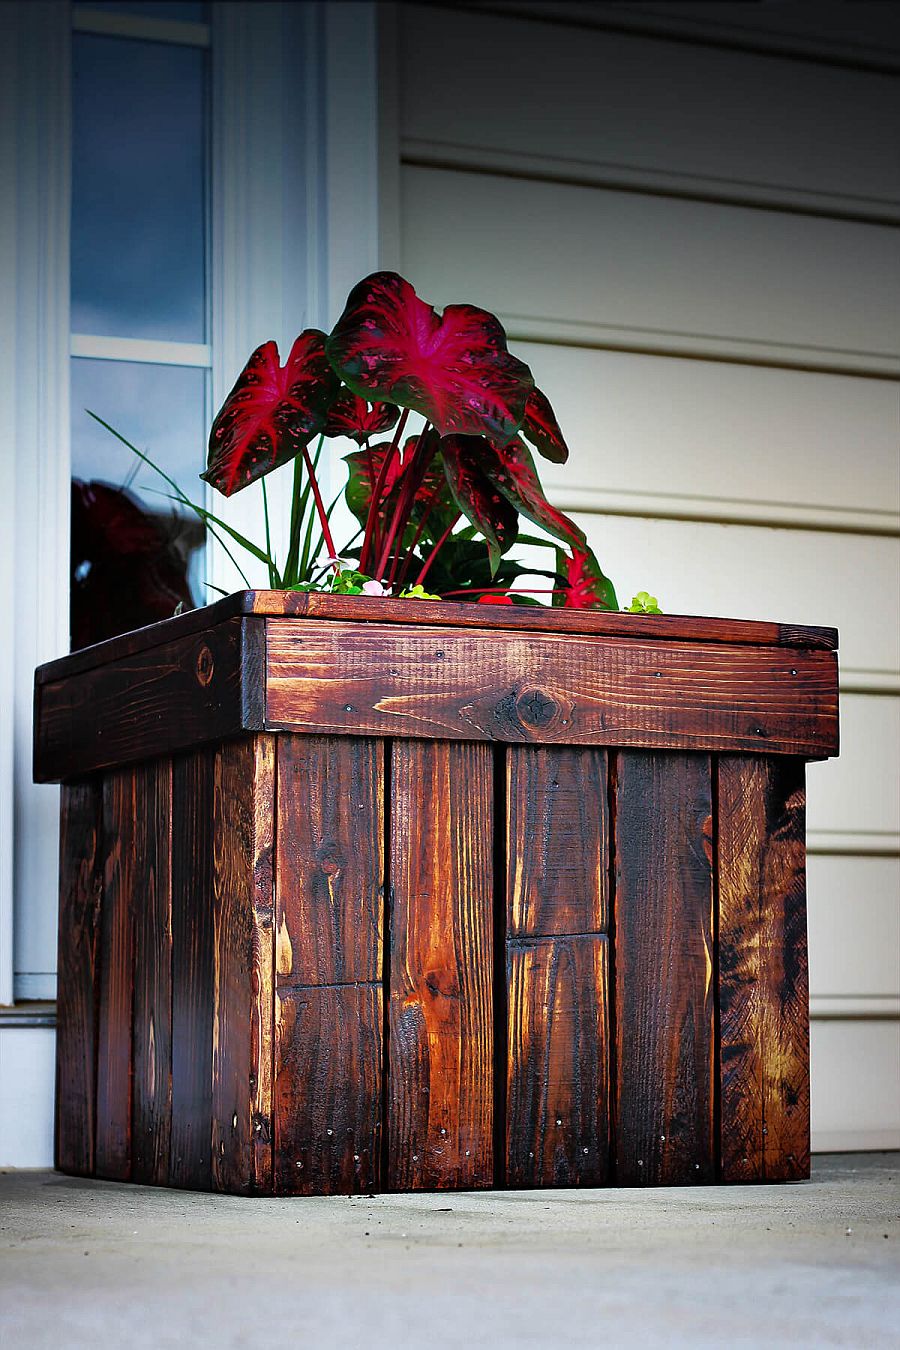 It-is-the-strain-of-the-wood-that-adds-even-more-charm-to-the-DIY-planter-design